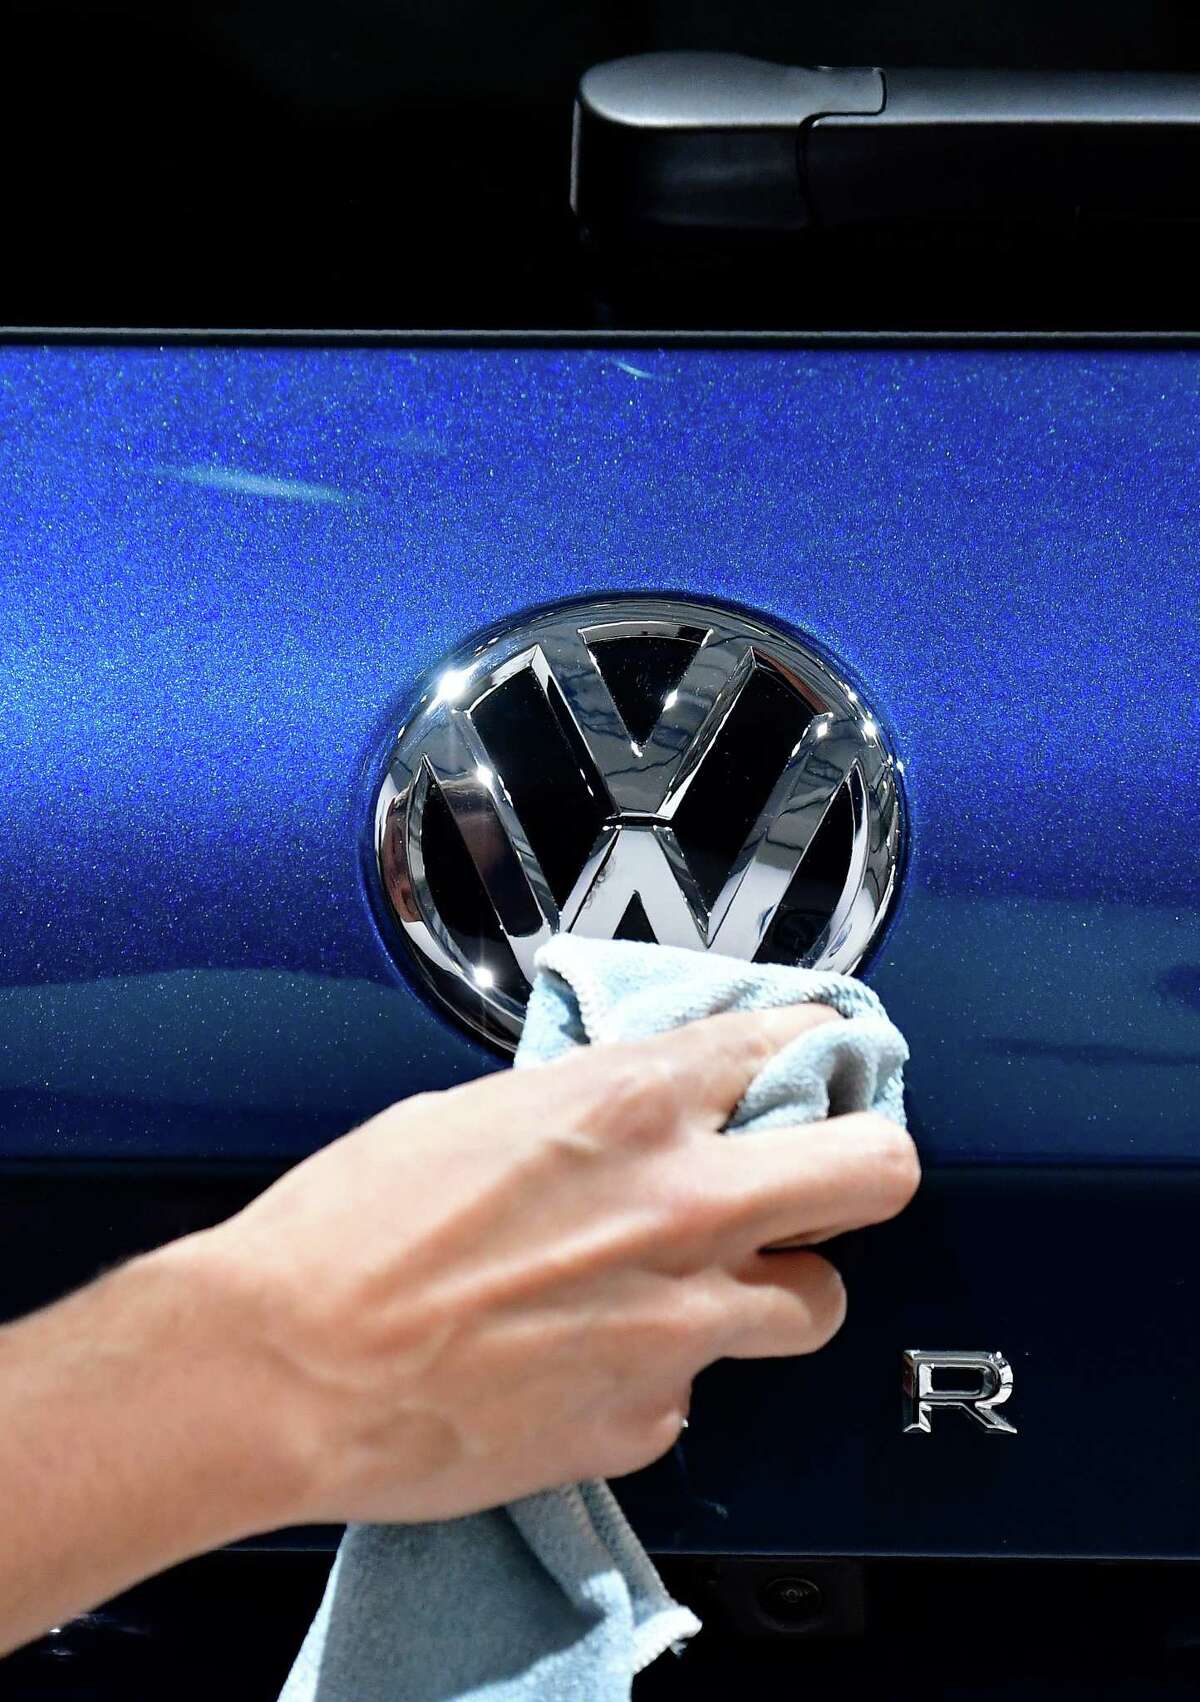 A staff member cleans a logo of an SUV VW Touareg on display ahead of the annual general meeting of German carmaker Volkswagen, in Berlin on May 3, 2018. / AFP PHOTO / Tobias SCHWARZTOBIAS SCHWARZ/AFP/Getty Images